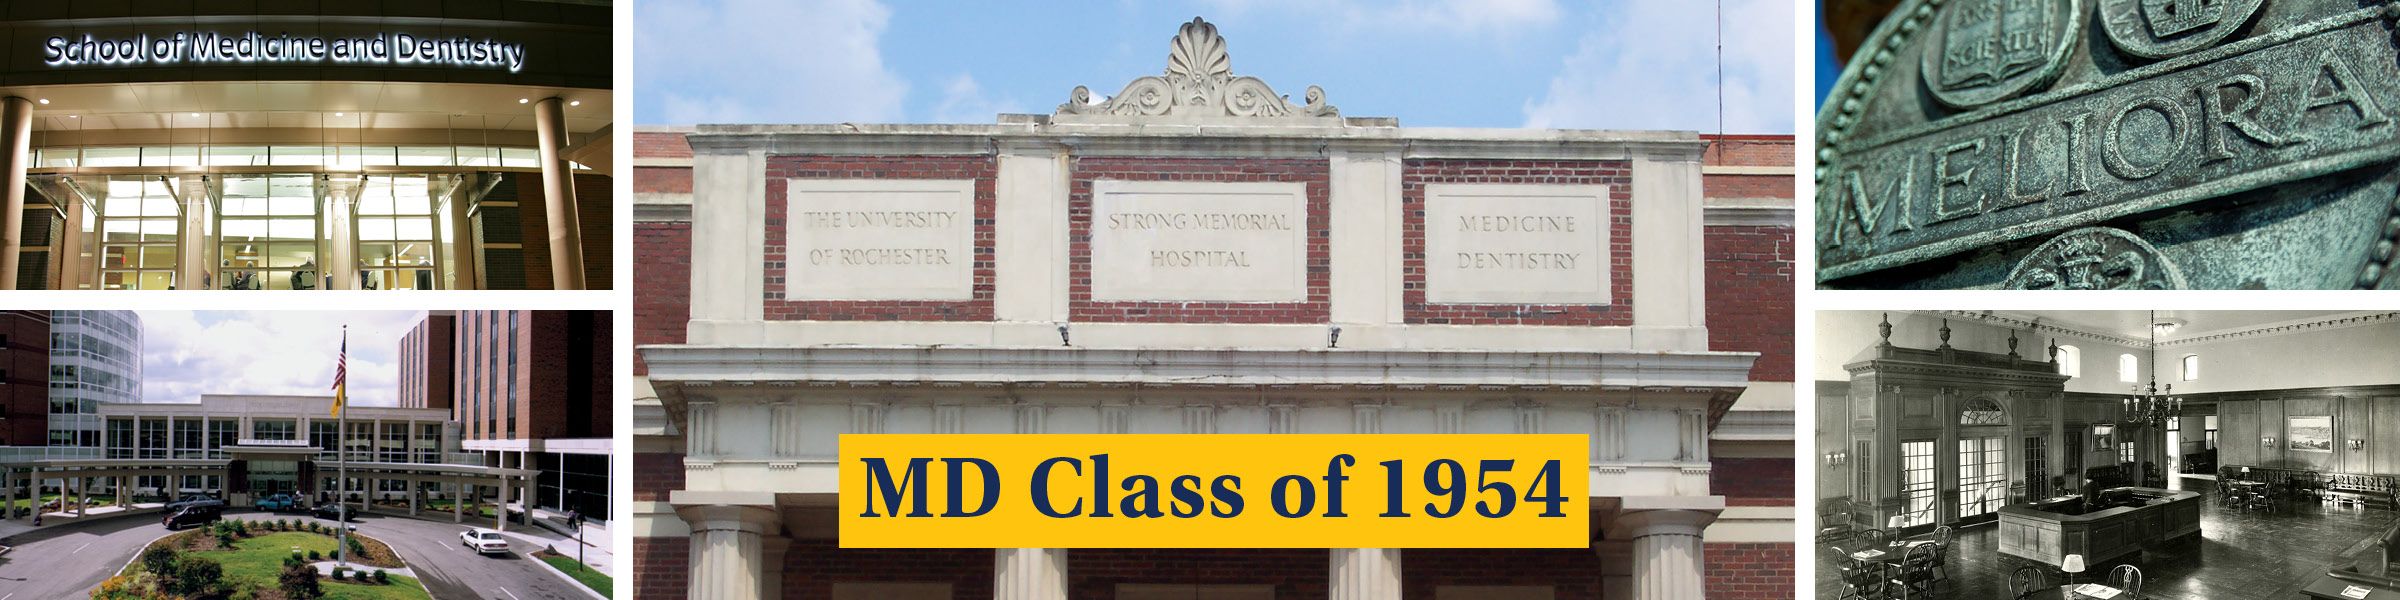 UR SMD Class of 1954